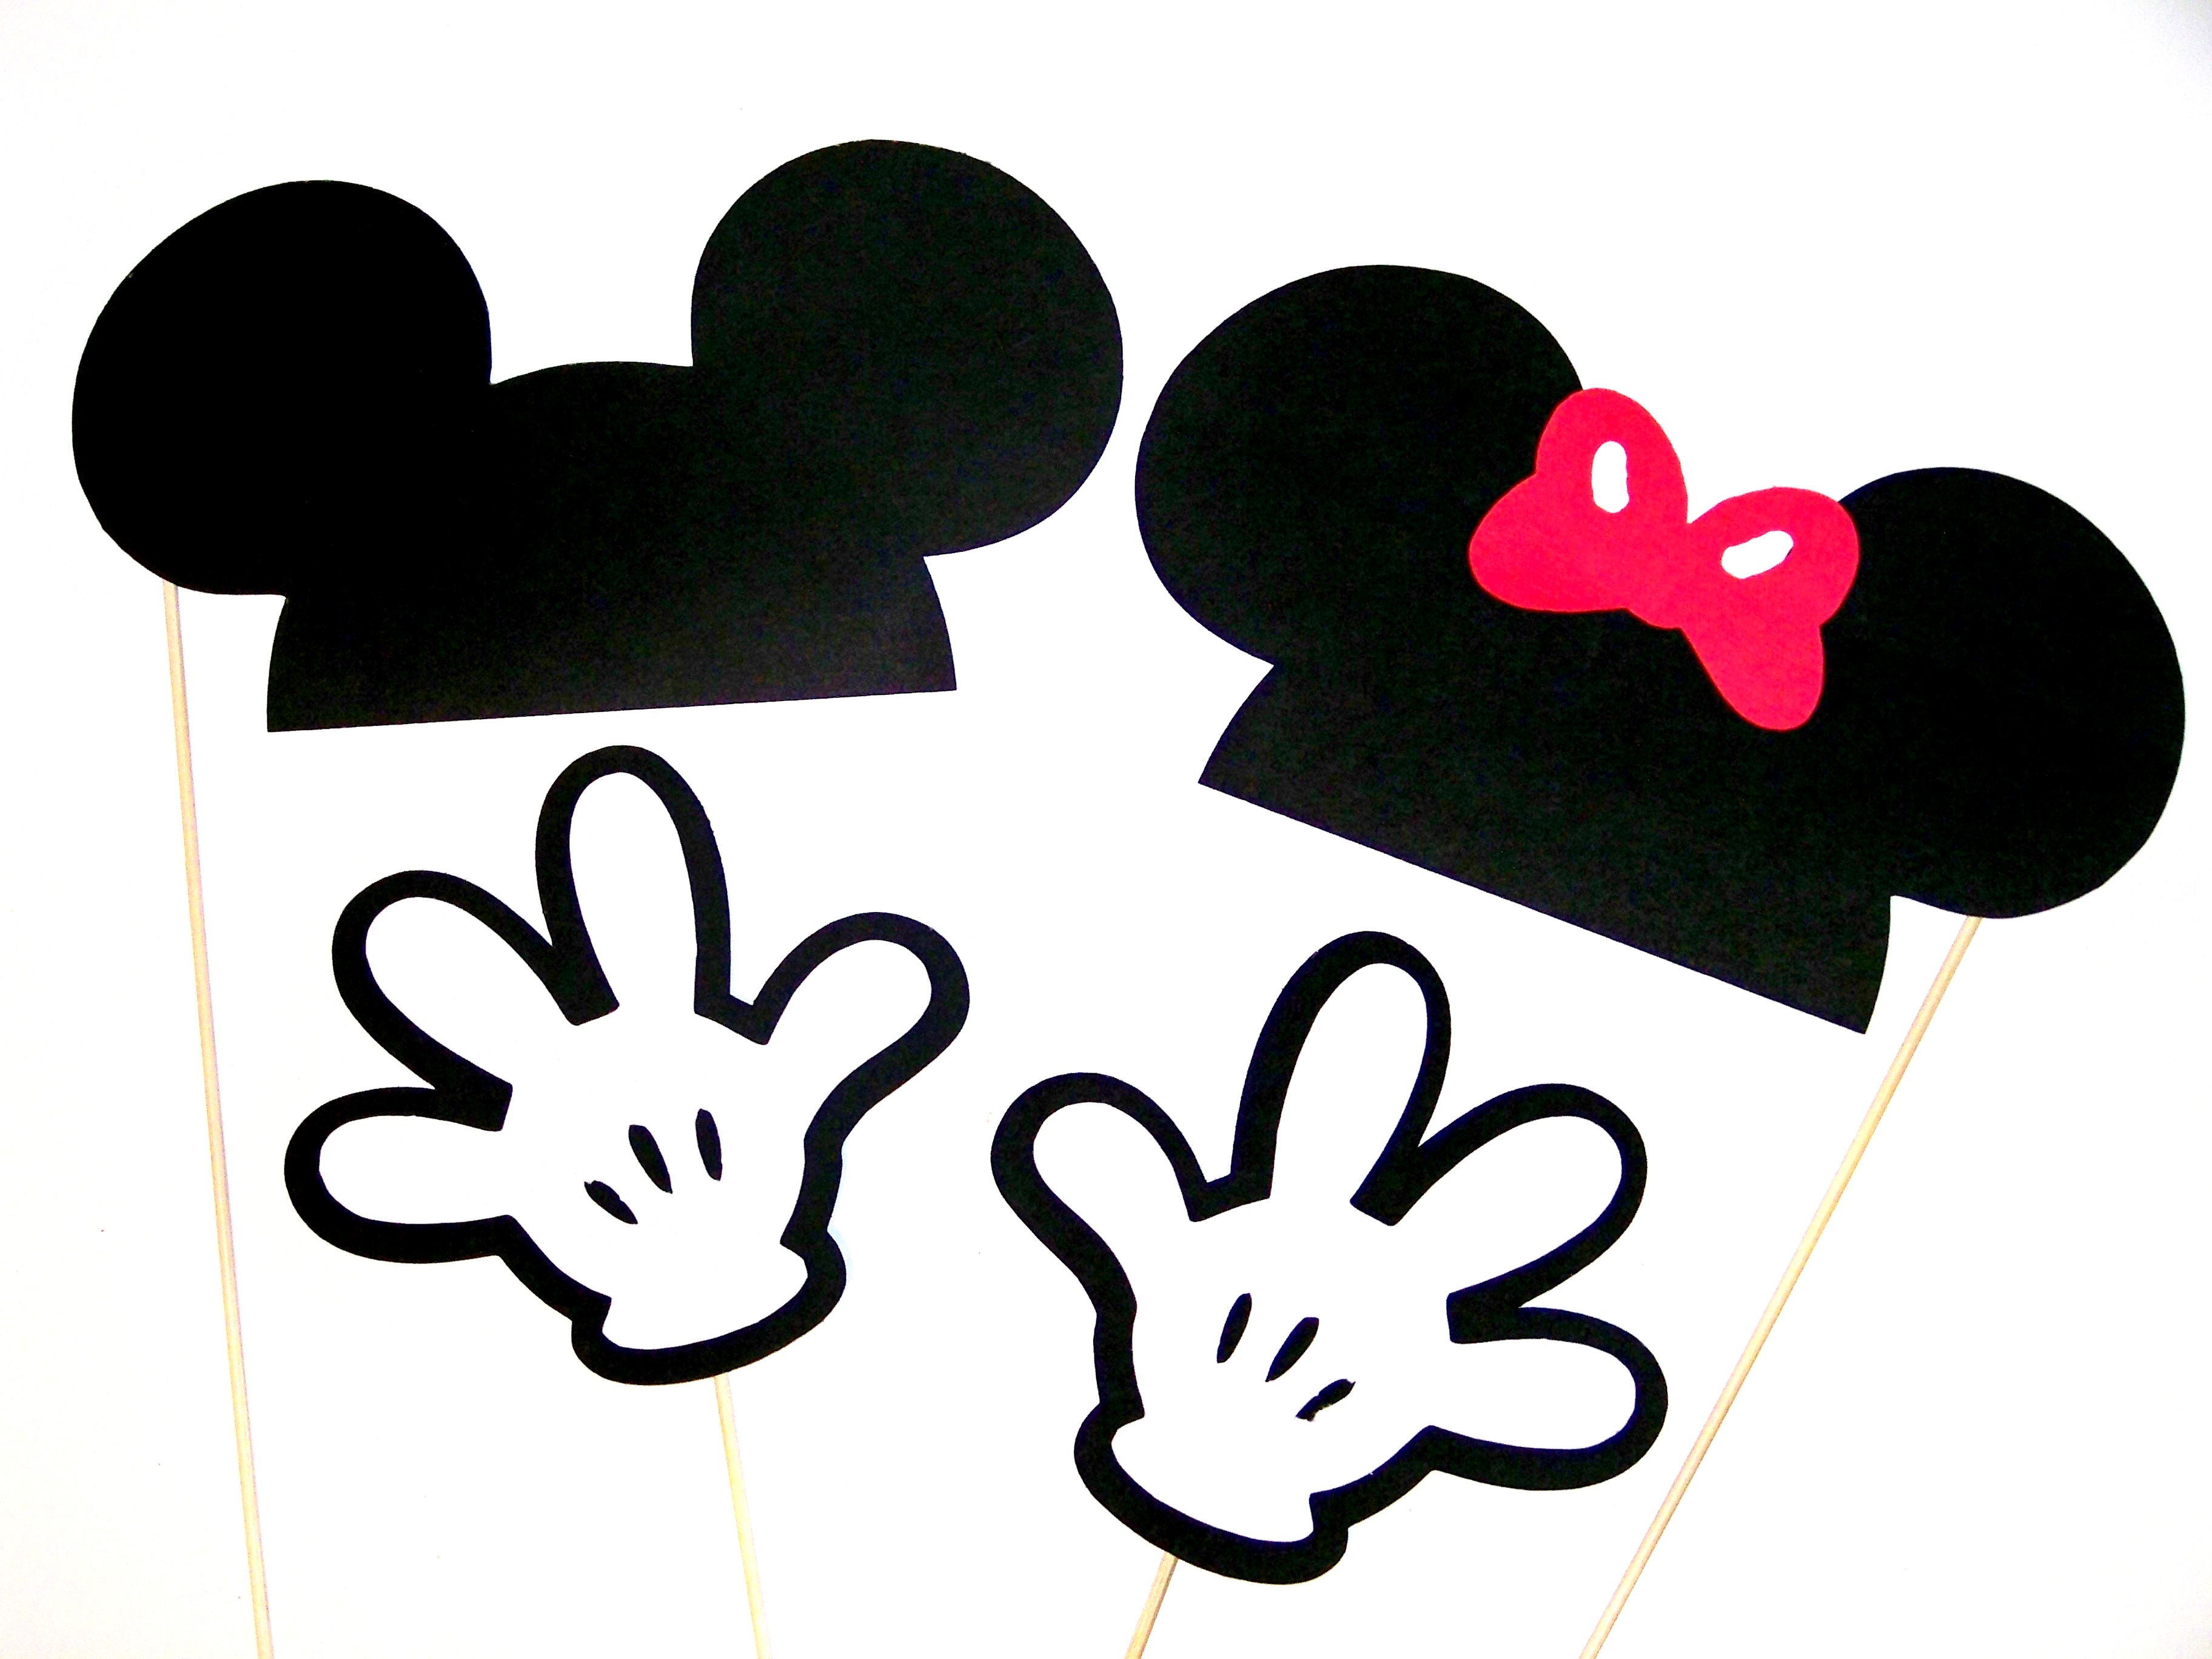 Mickey mouse hands.